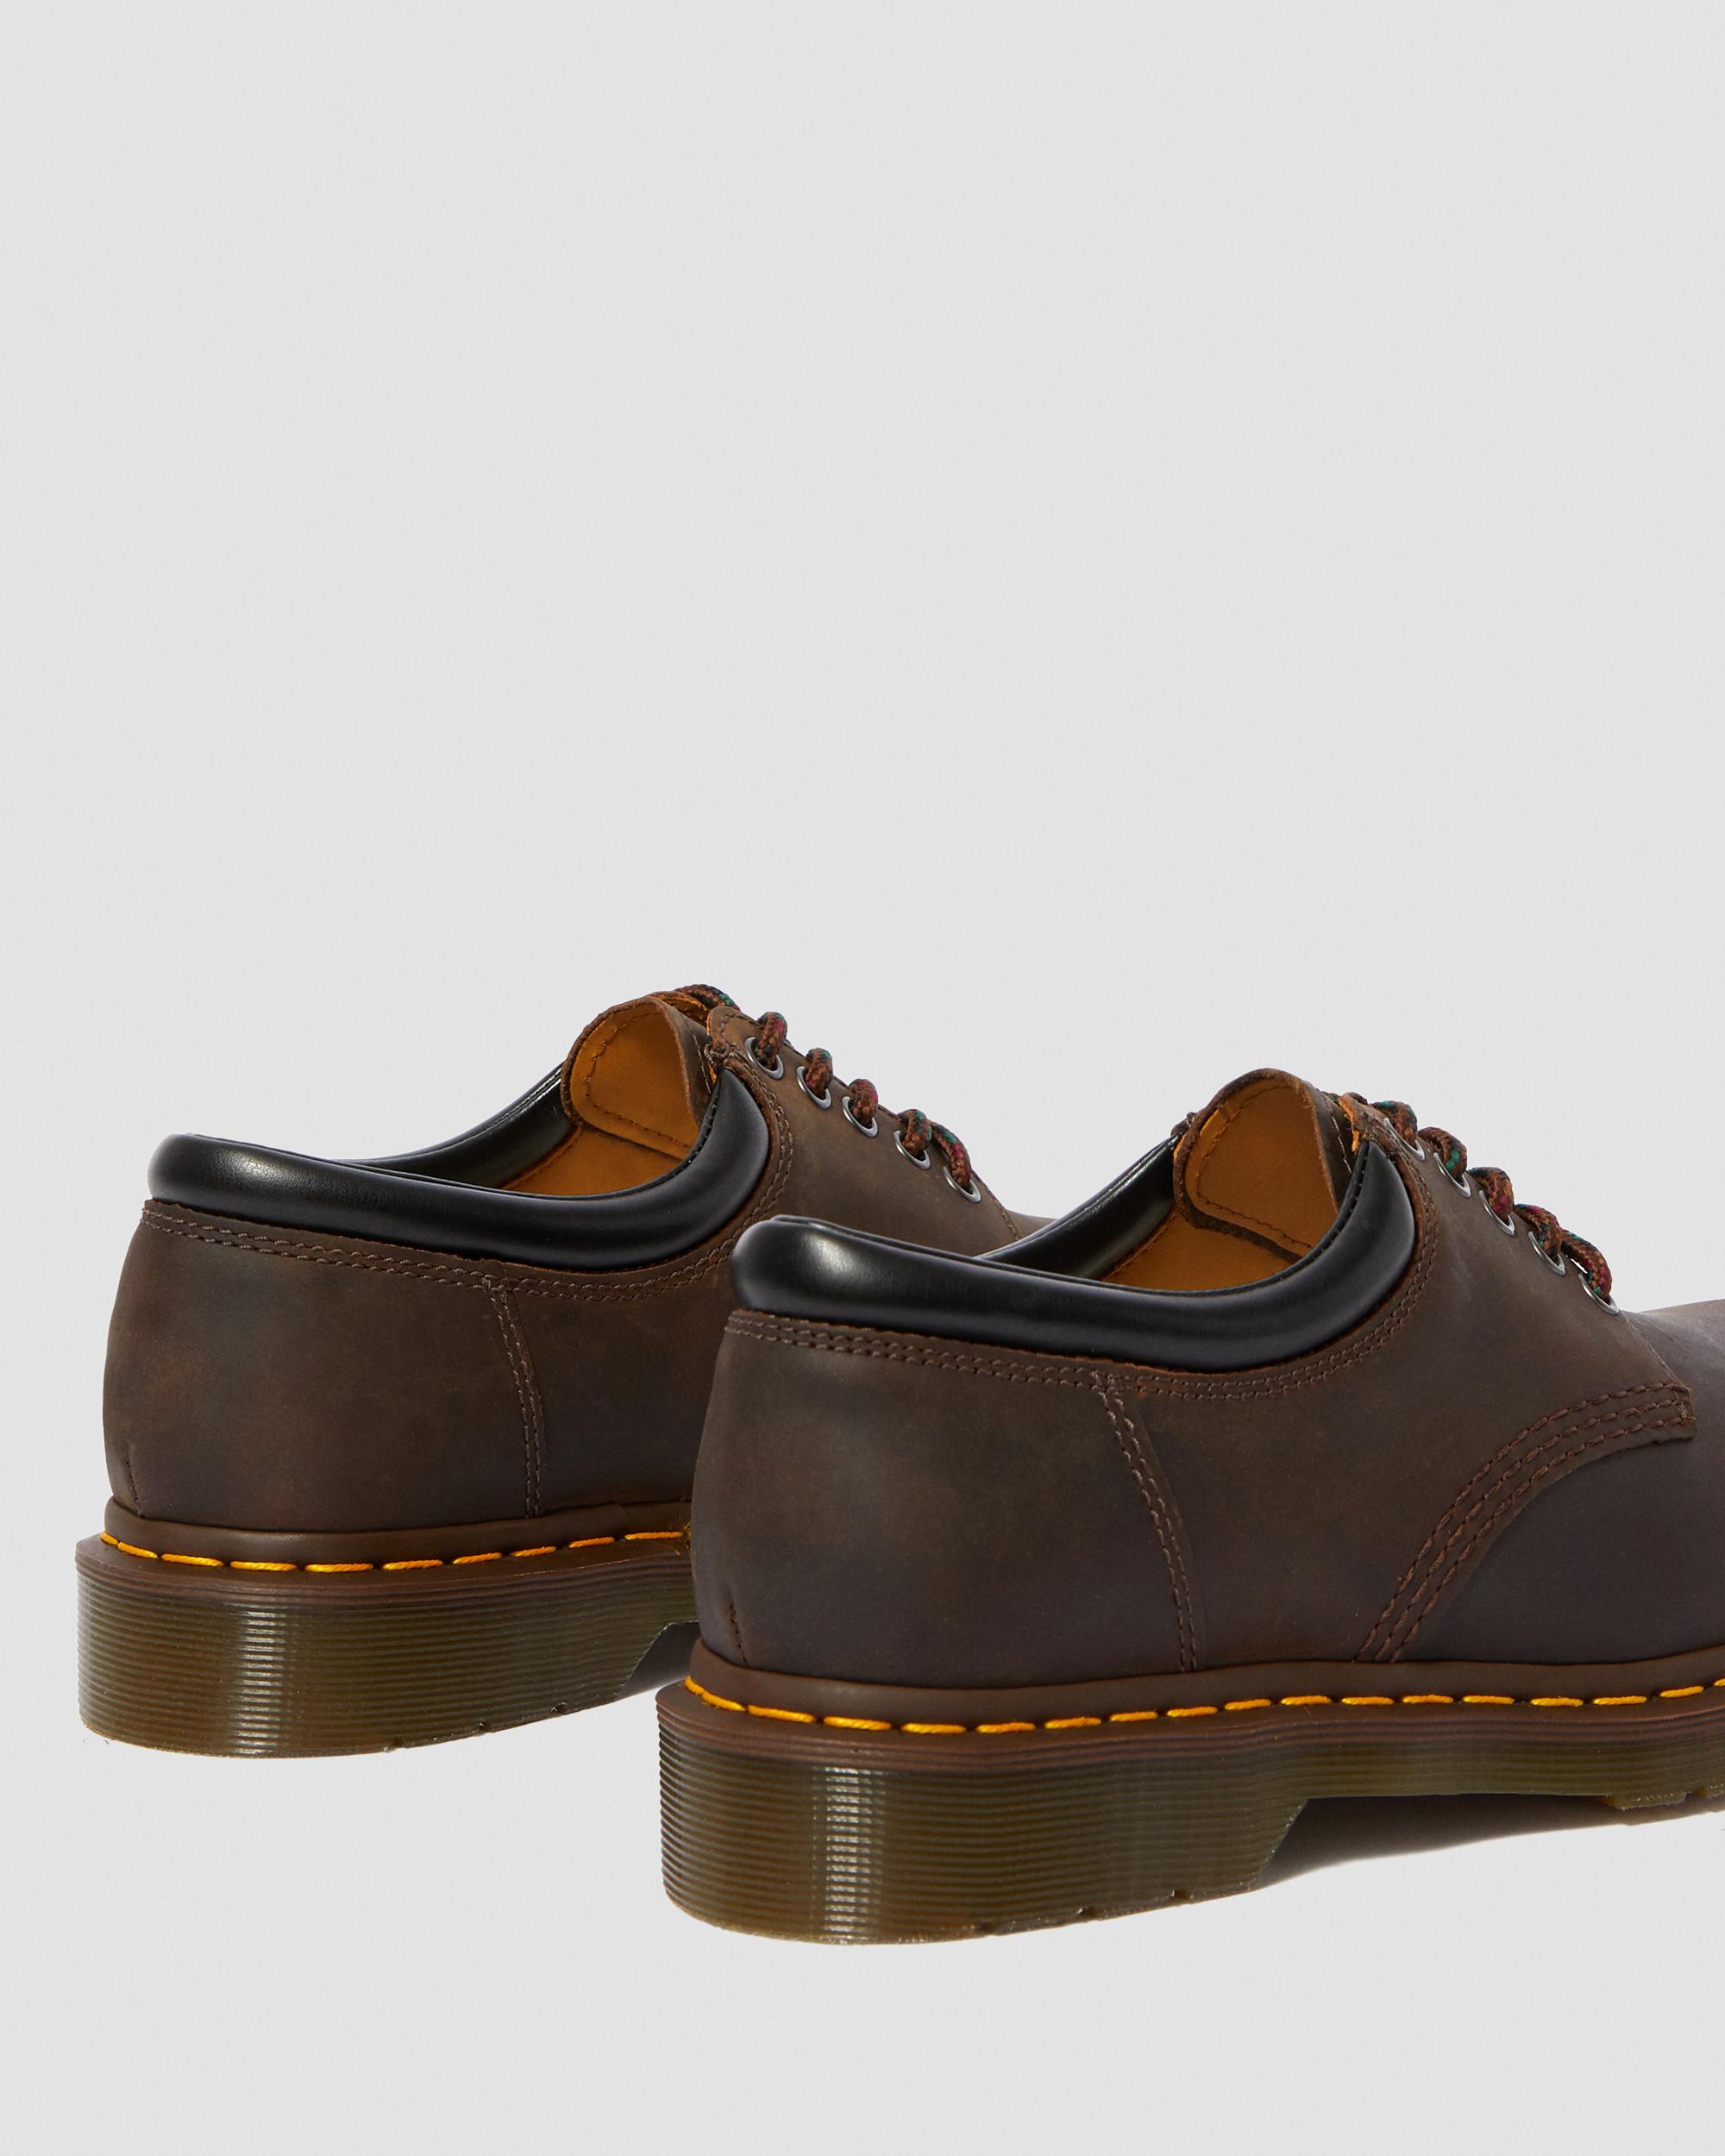 8053 Crazy Horse Leather Casual Shoes in Dark Brown | Dr. Martens